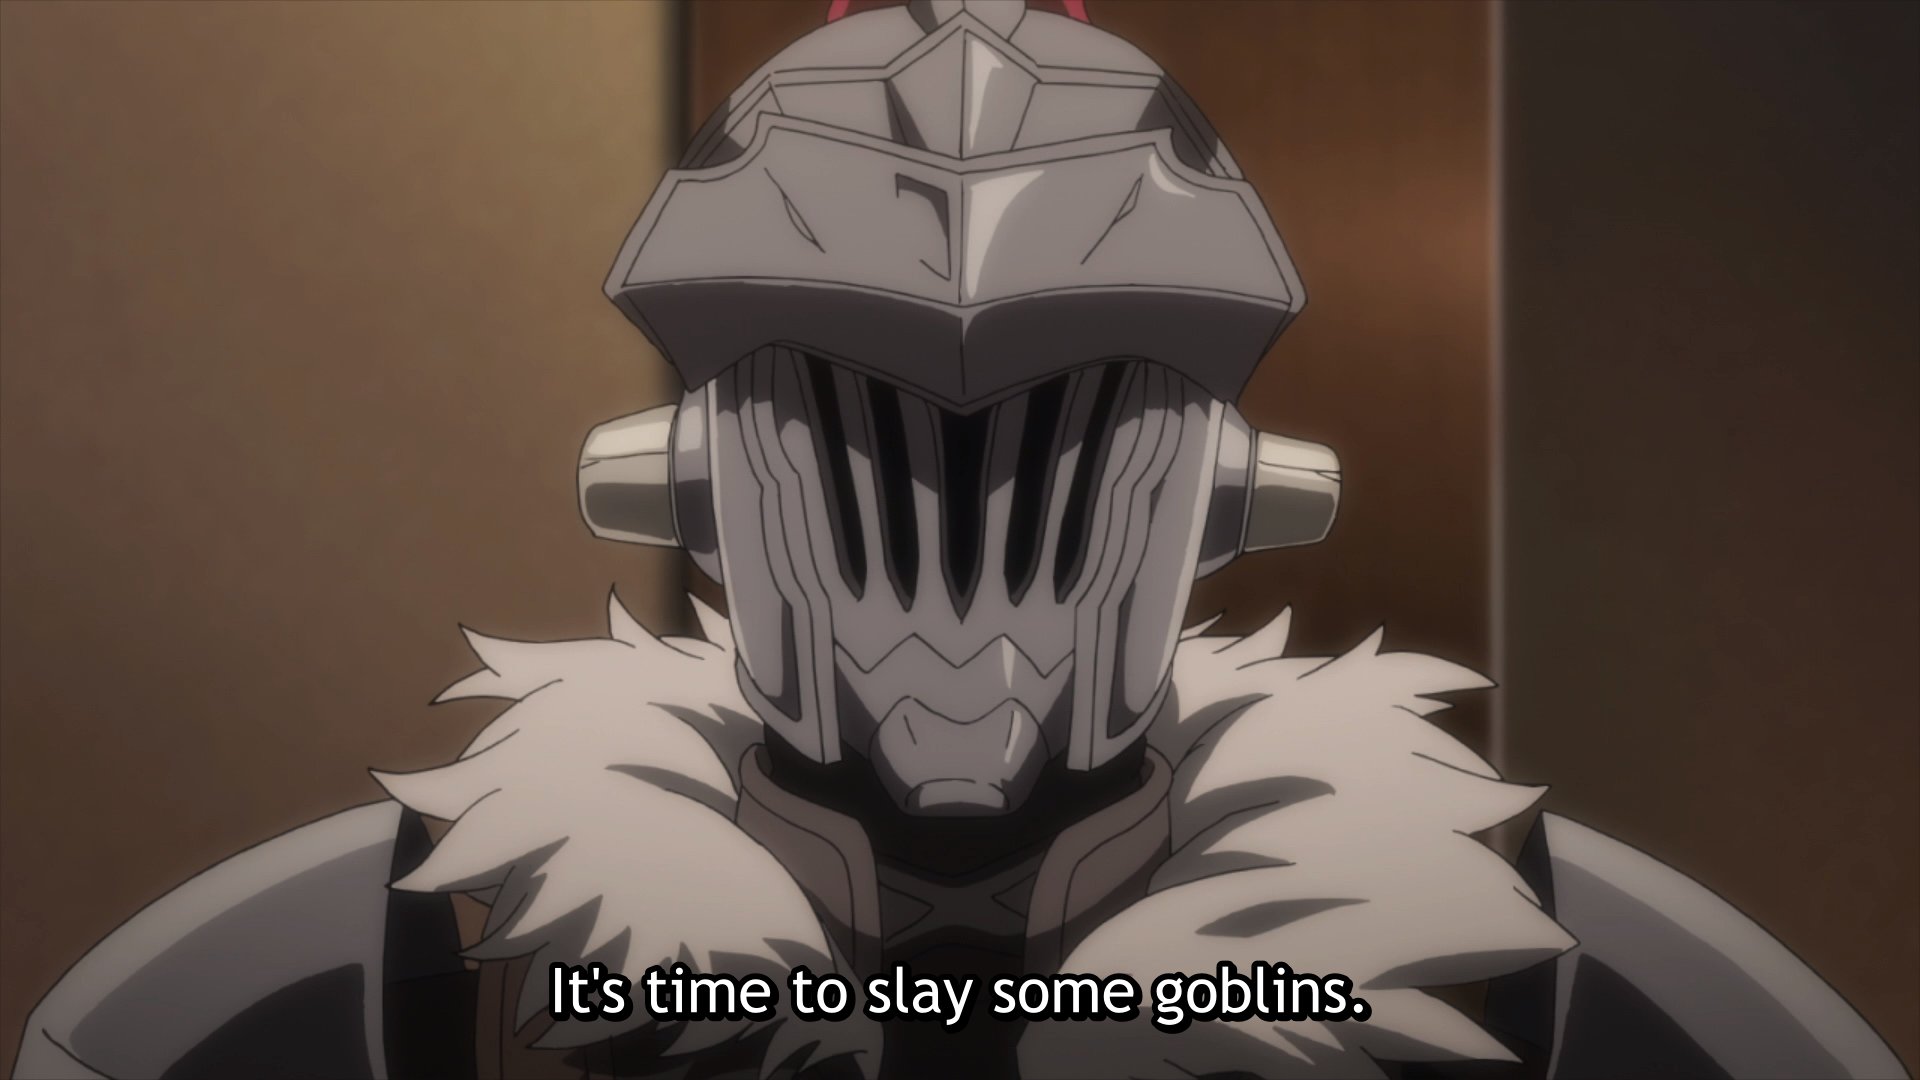 Crunchyroll Games on X: "Rise and shine, it's goblin slaying time. ⚔️  https://t.co/CjjJ1wlVoy" / X